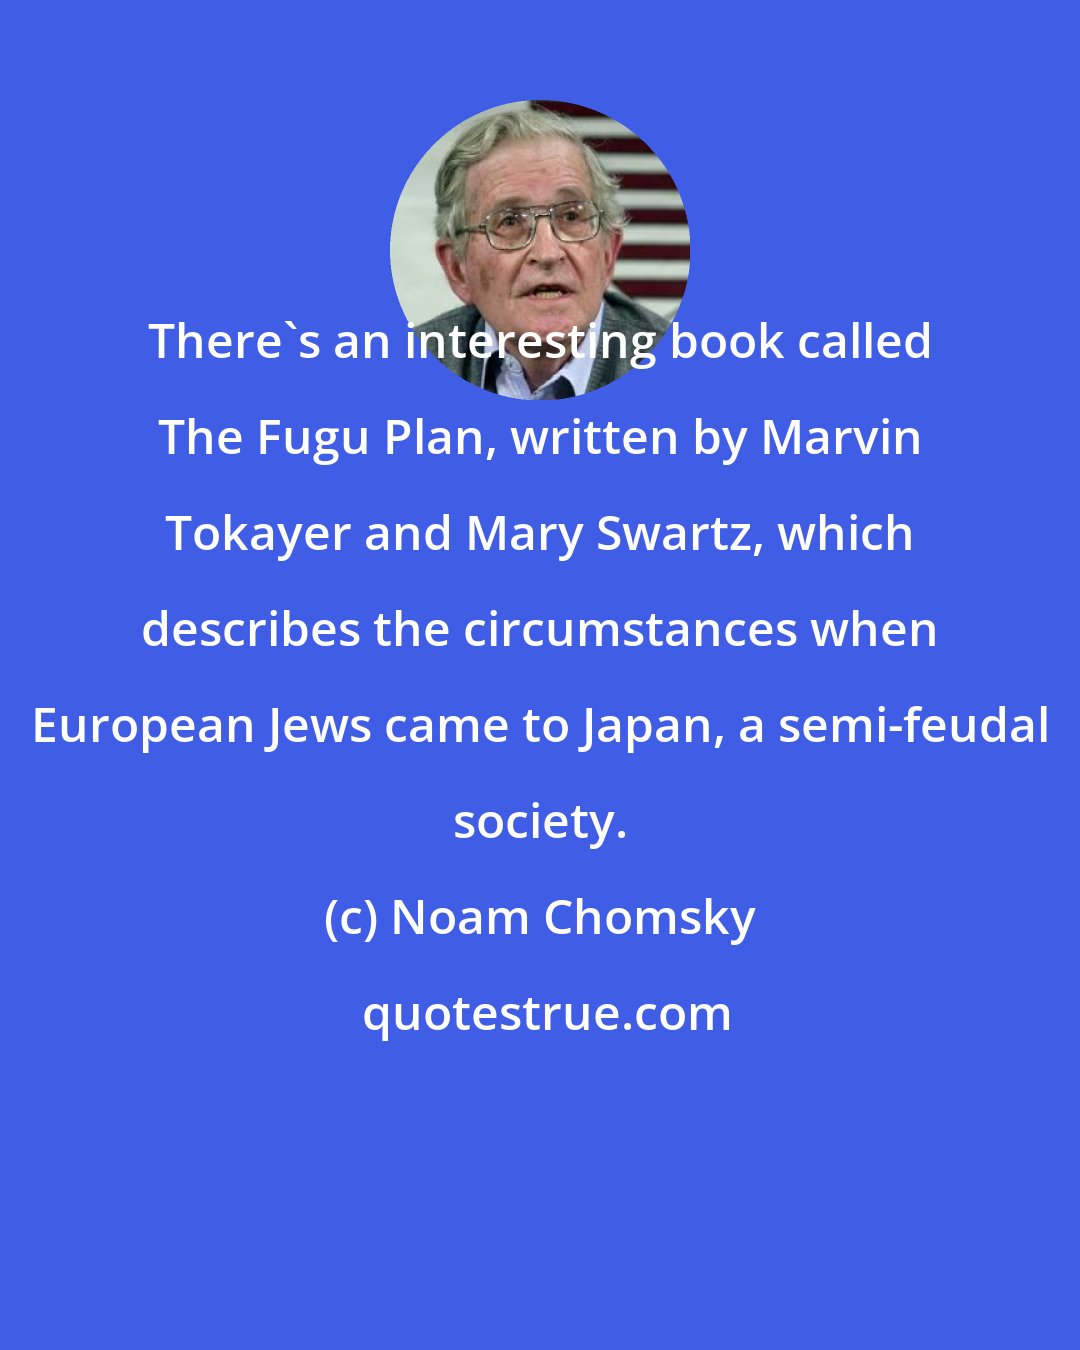 Noam Chomsky: There's an interesting book called The Fugu Plan, written by Marvin Tokayer and Mary Swartz, which describes the circumstances when European Jews came to Japan, a semi-feudal society.